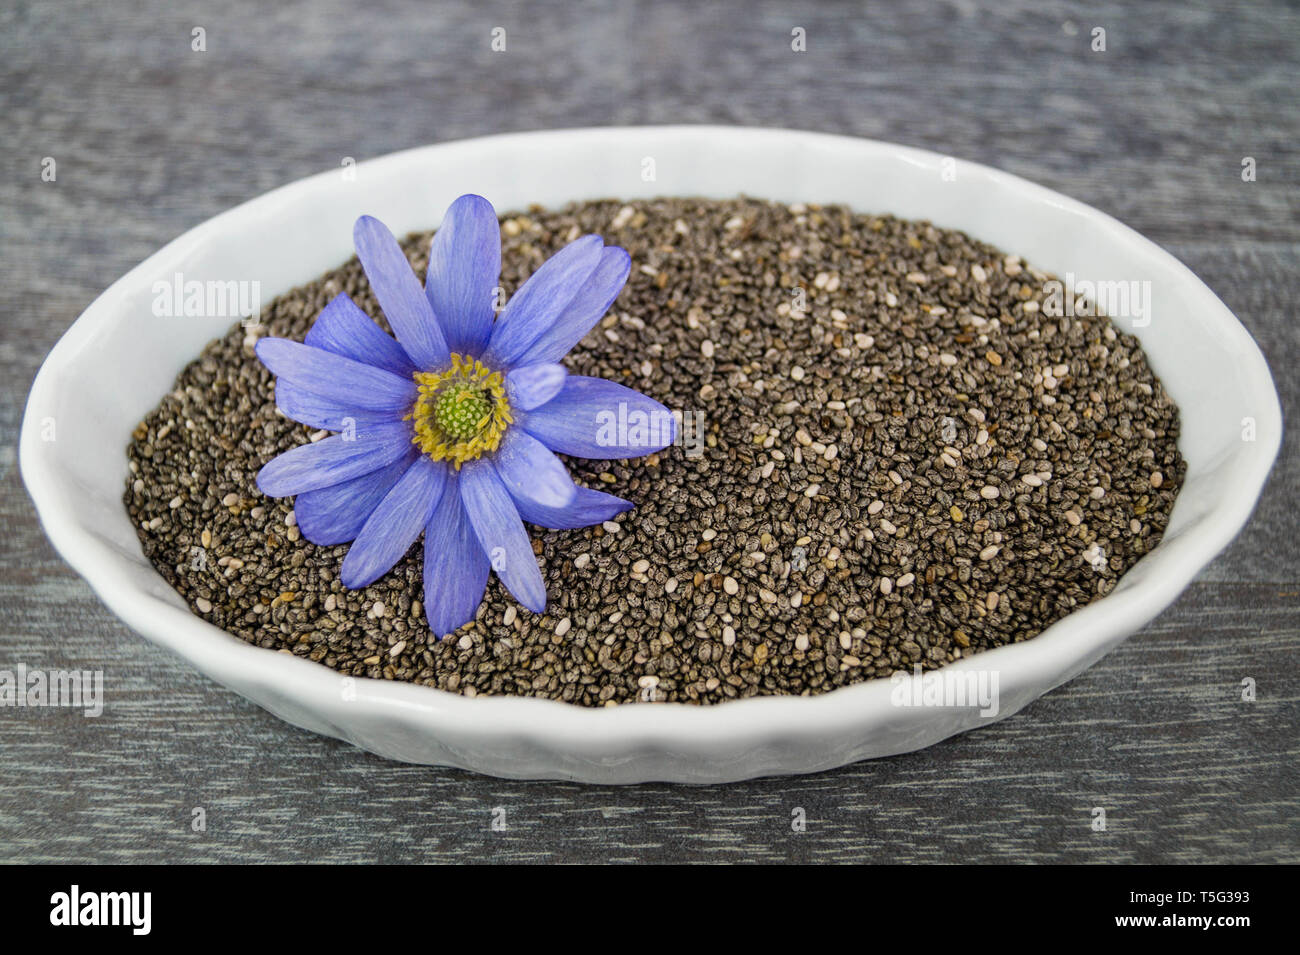 Superfood chia seeds Banque D'Images